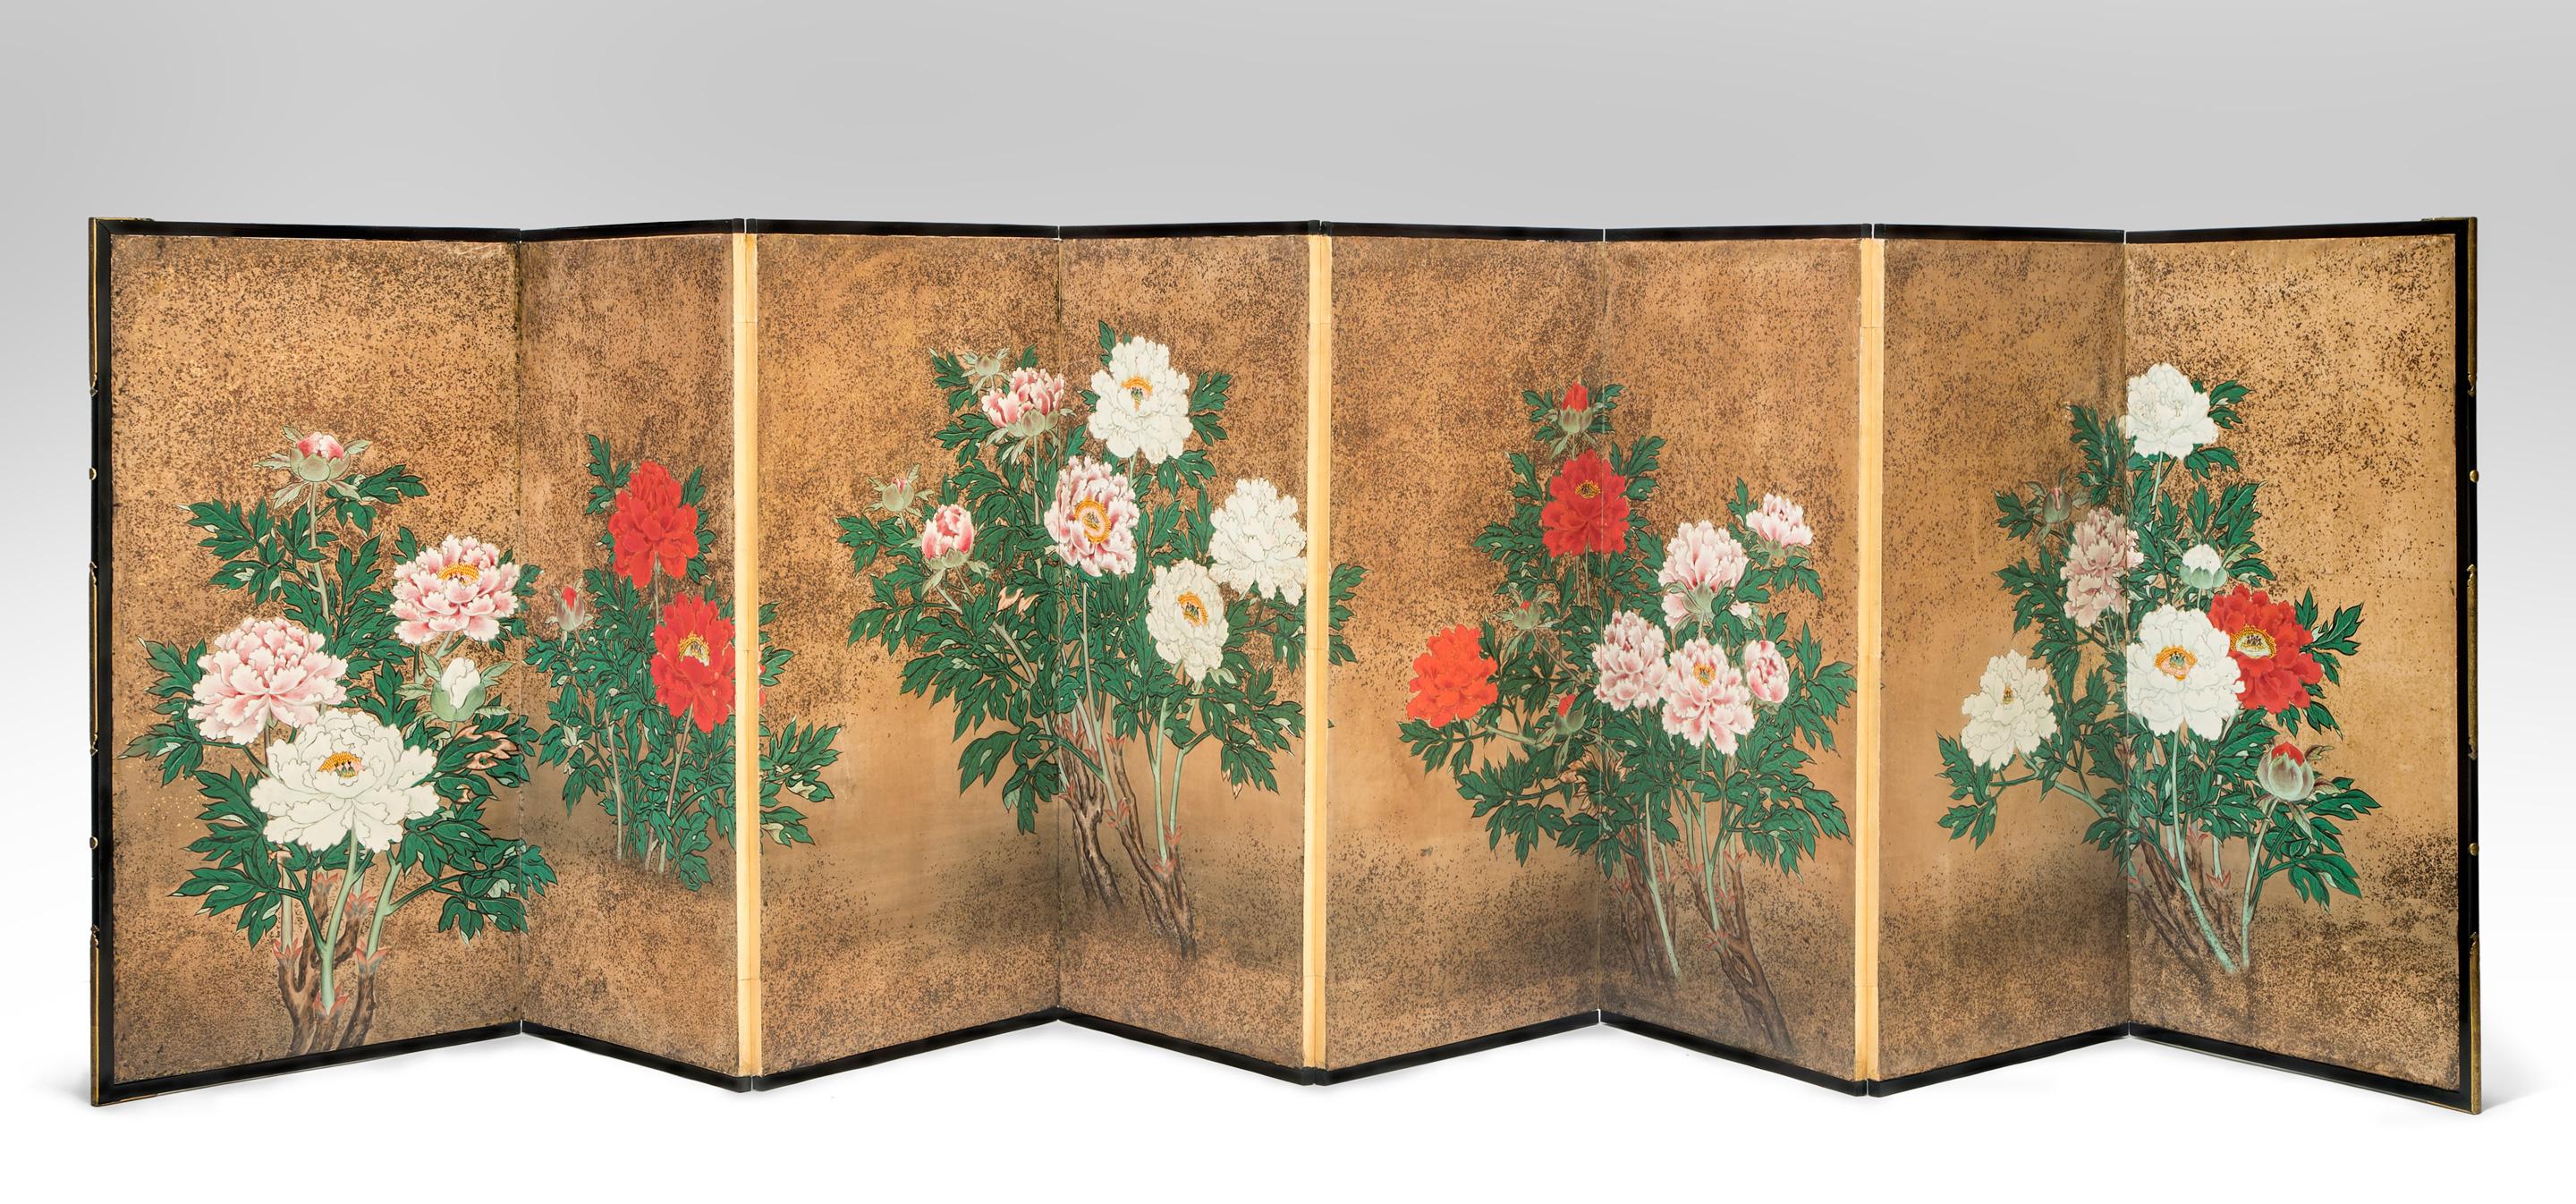 Japanese 8-panel screen of flowering peonies
A remarkable and rare low screen with each panel featuring an exuberant display of glorious multicolored peonies. The gold maki-e background centered with branches of blooming red, pink and white peonies